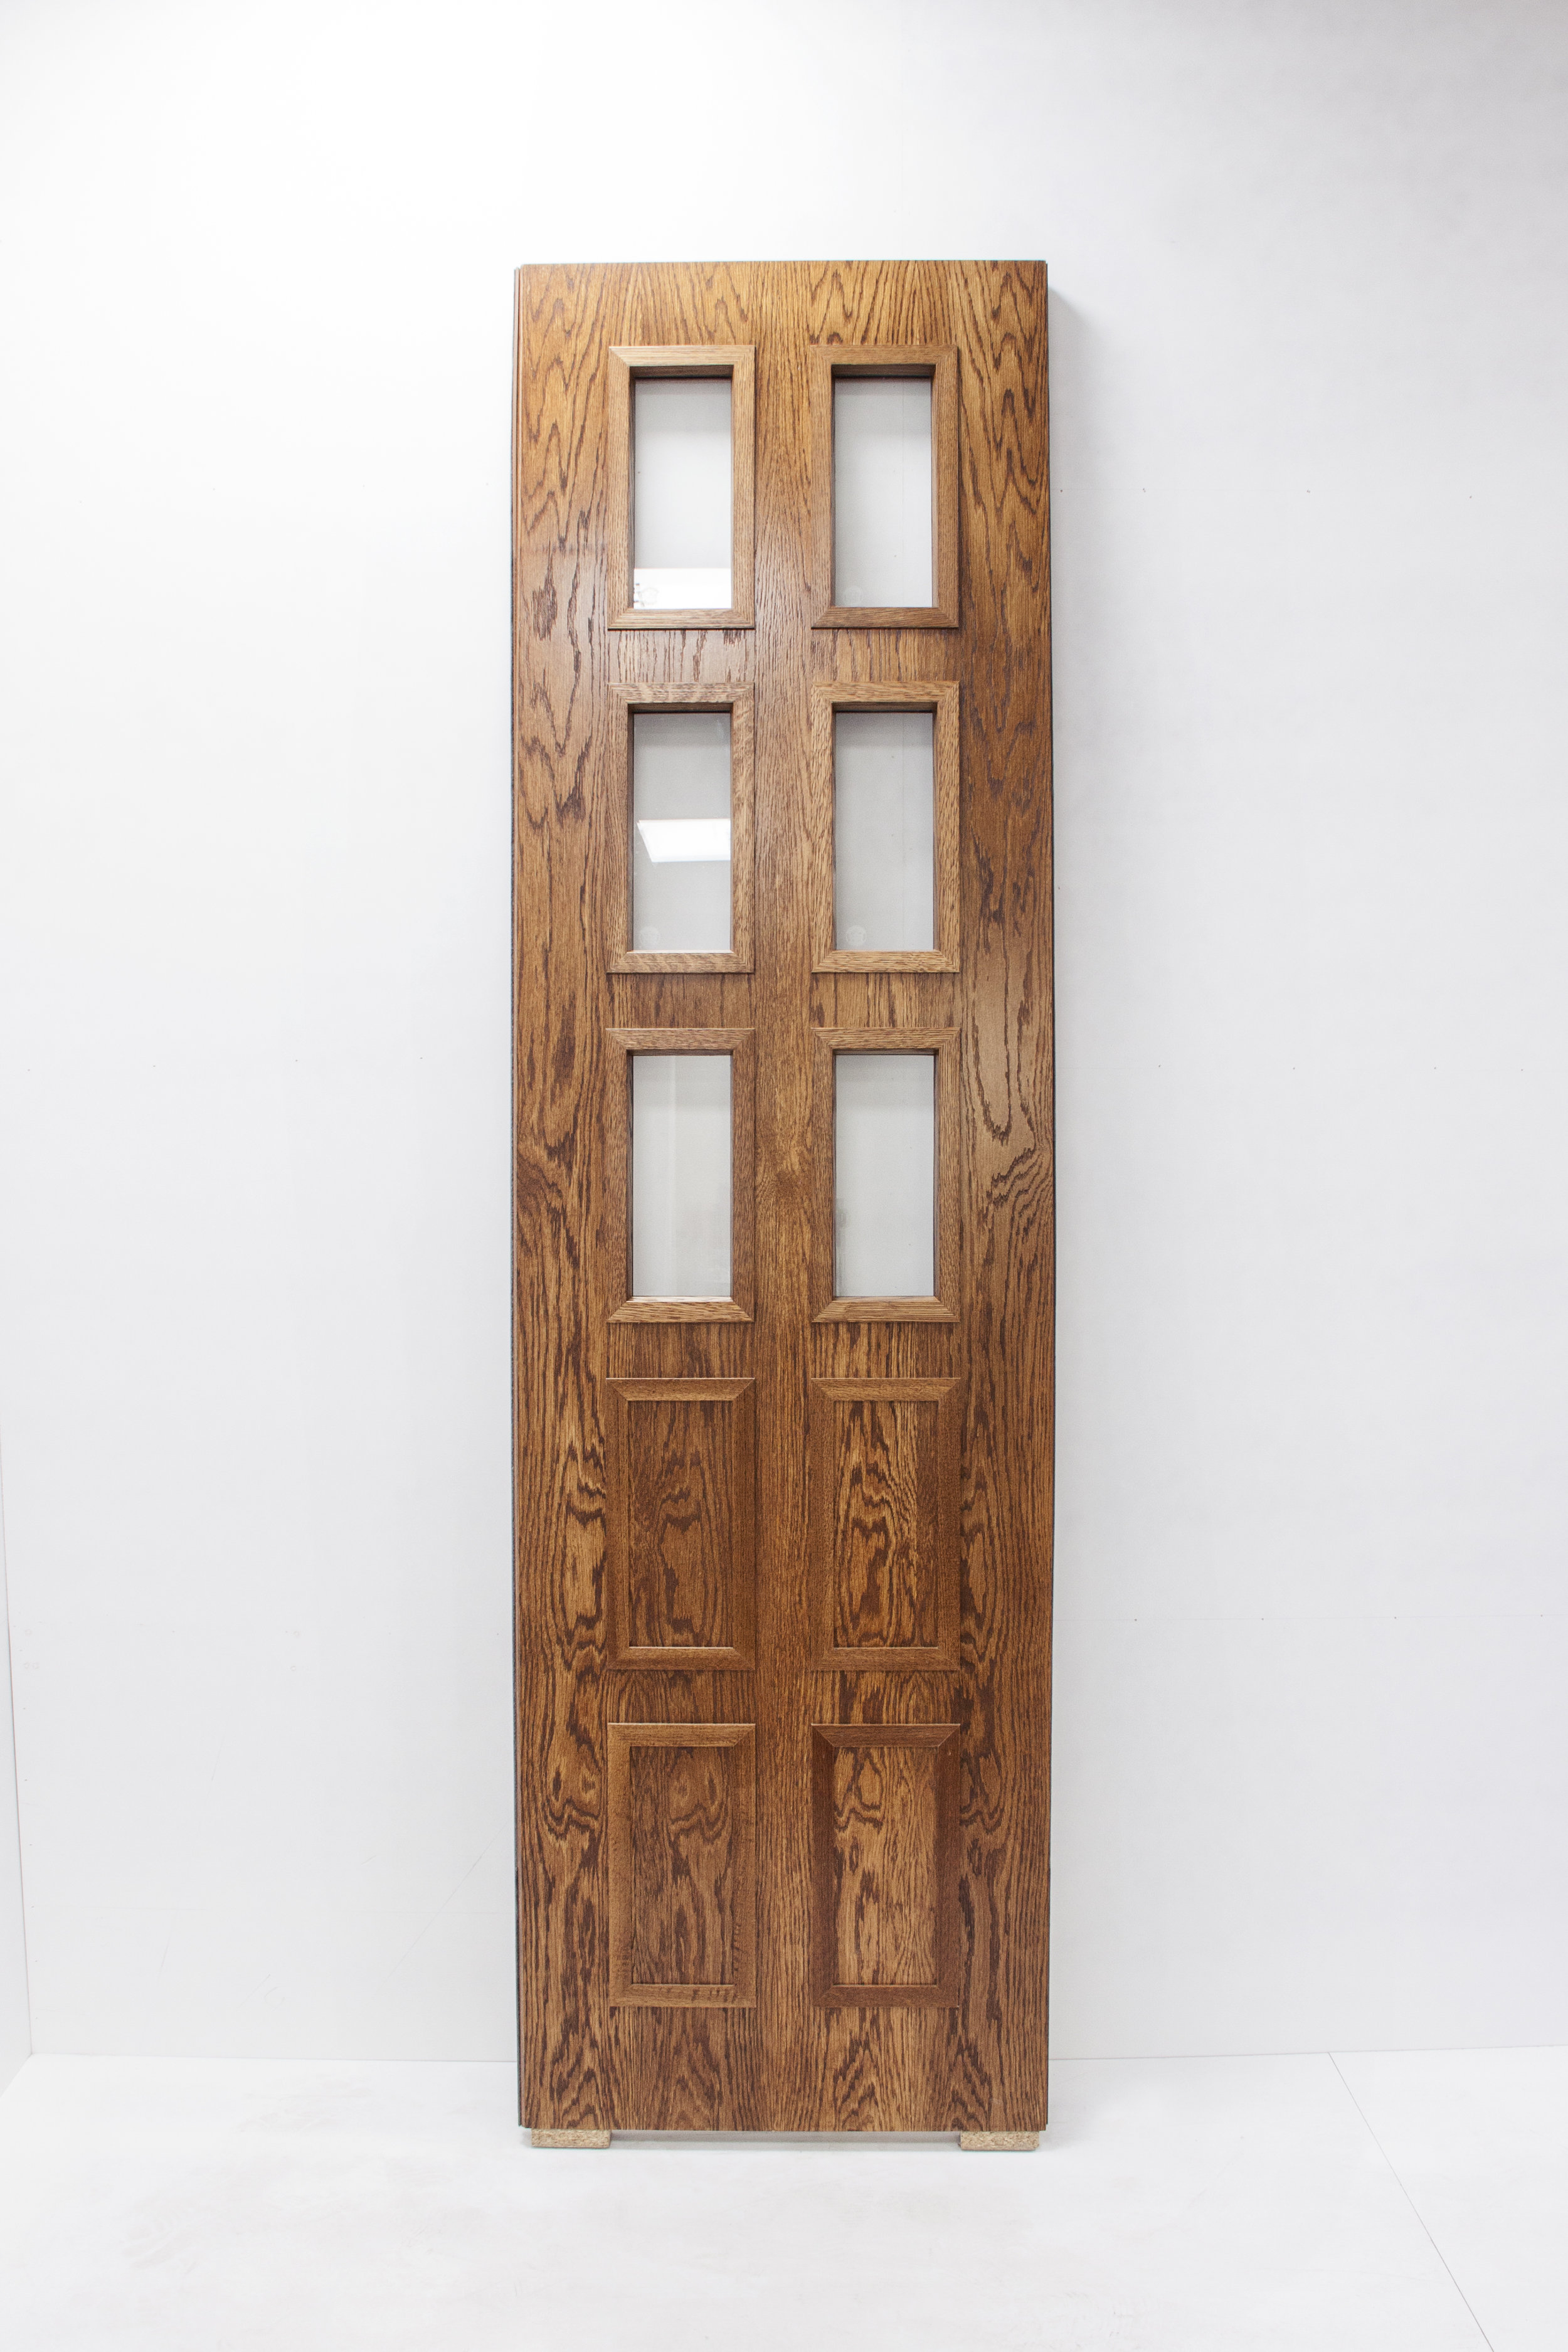 American White Oak stained fire door with vision panels